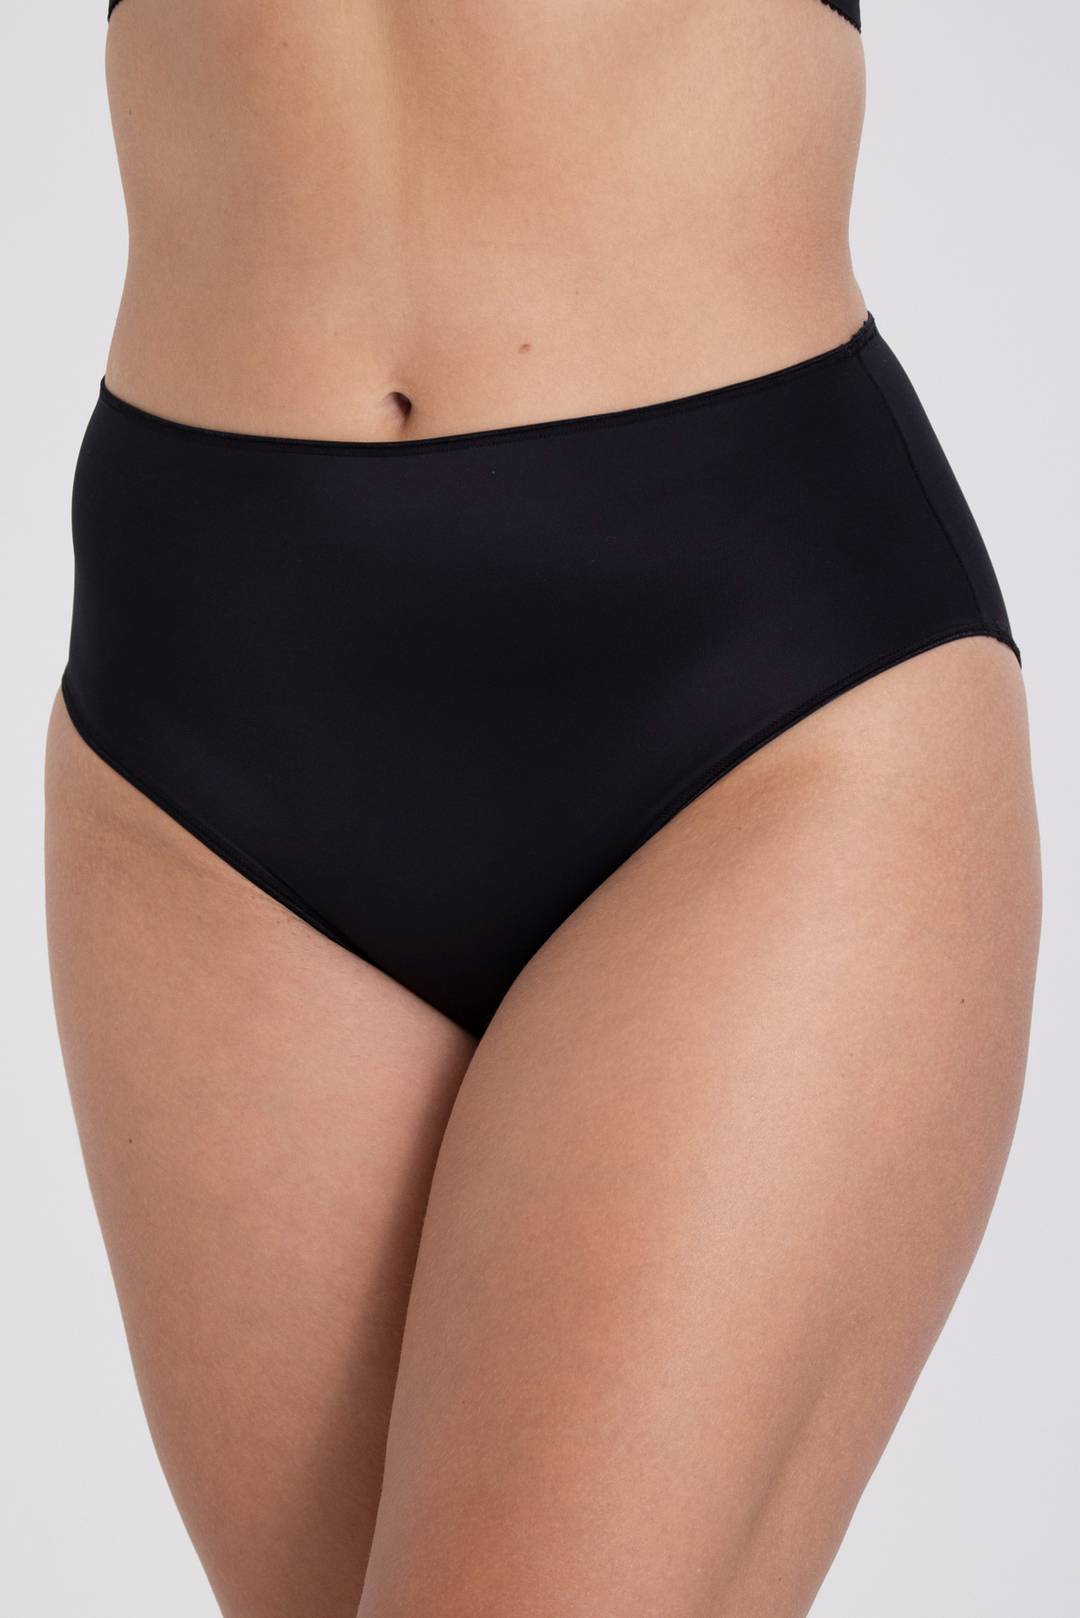 Recycled Comfort midi panty - Soft and comfortable material made